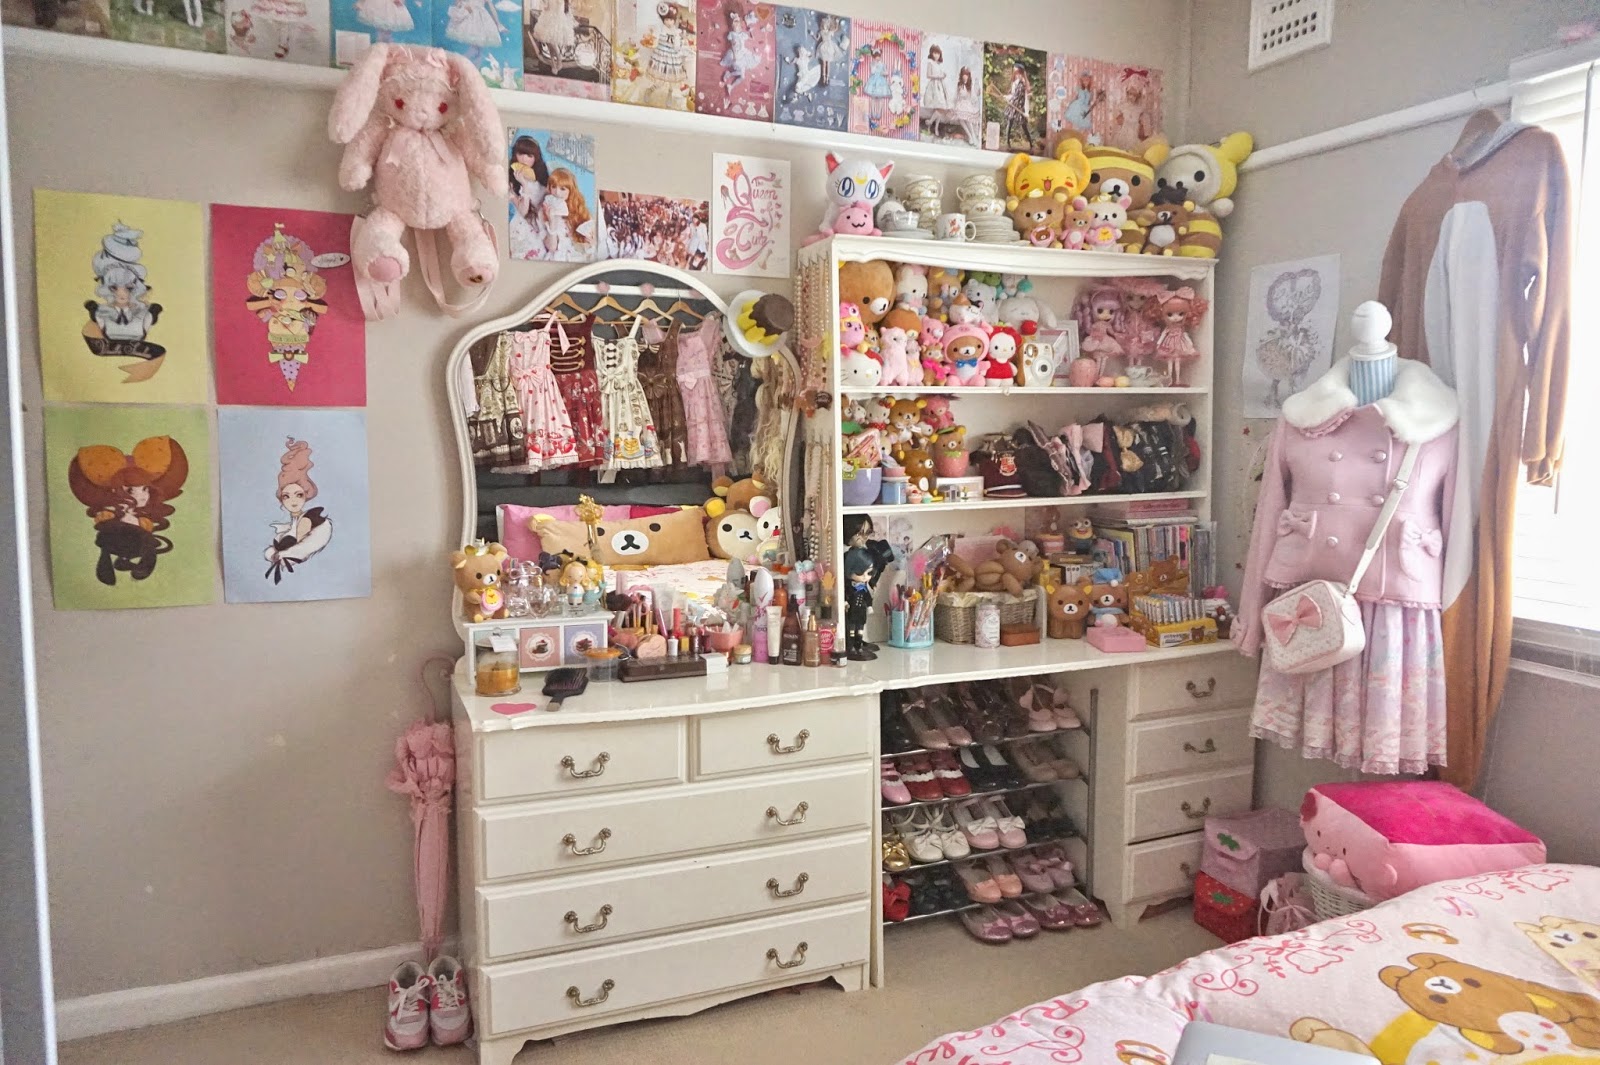 Milkyfawn - A lolita blog.: Welcome to my bedroom!